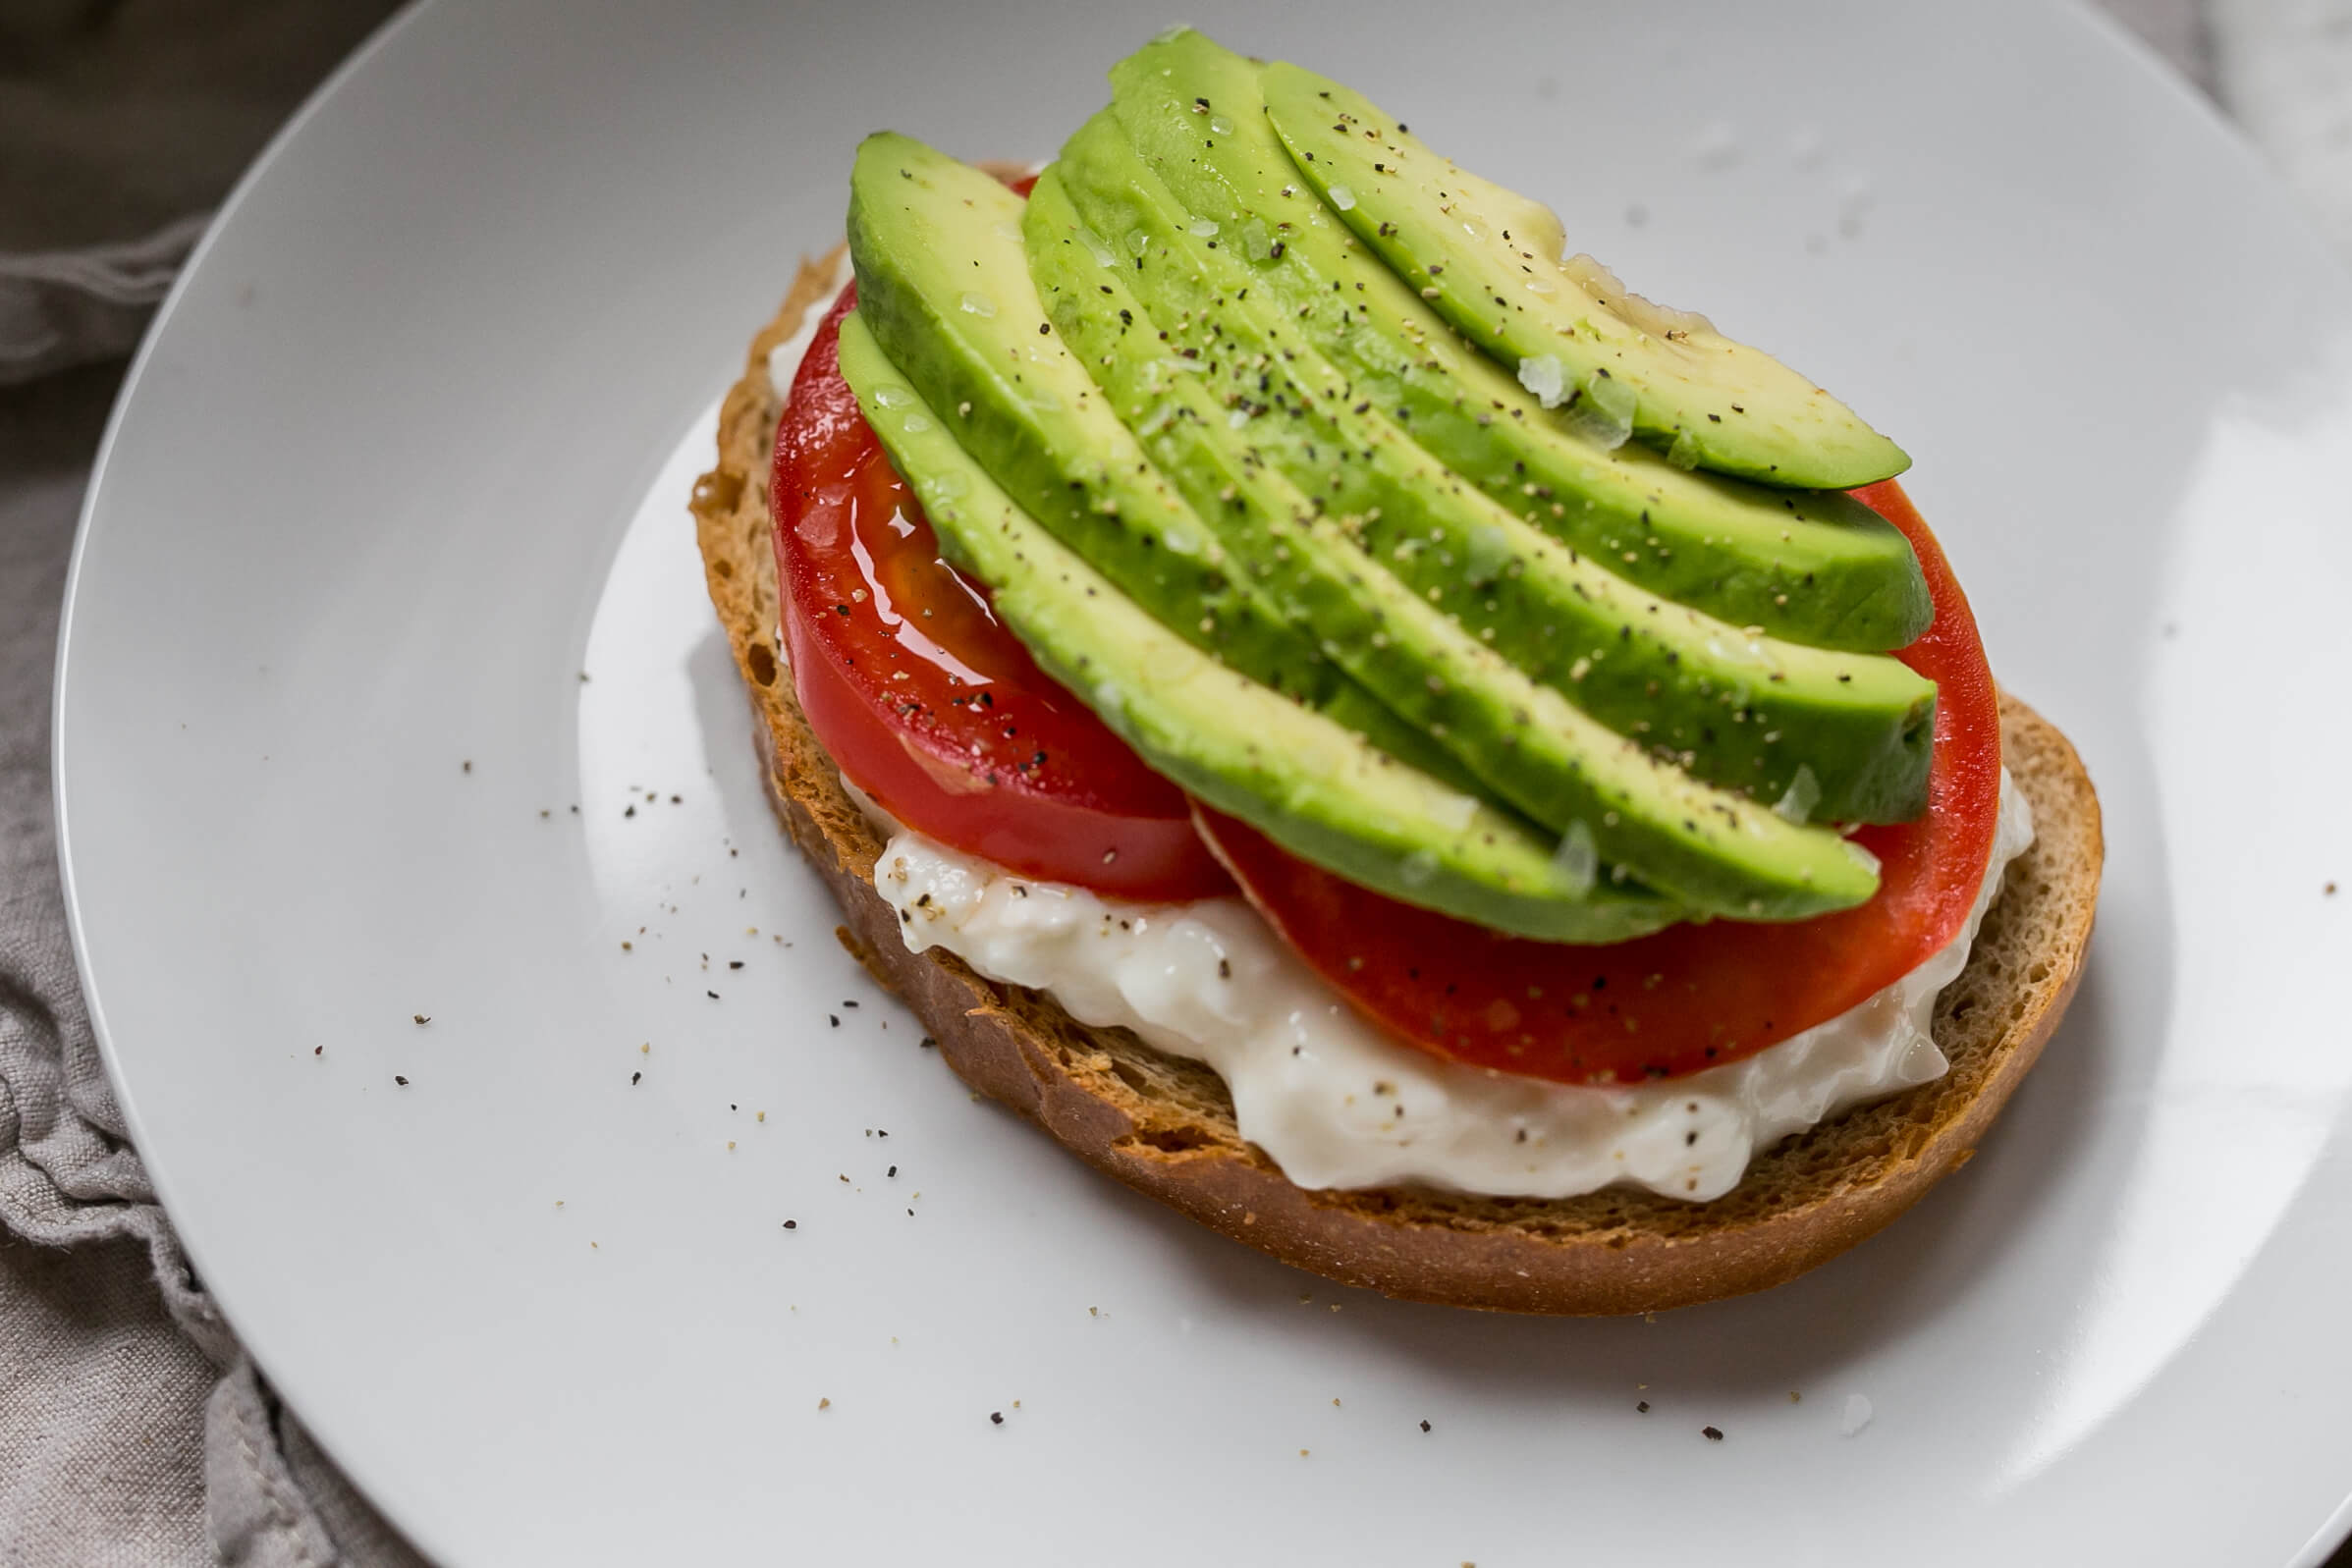 20 Meal Ideas to Support Student-Athletes: Avocado Toast with Cottage Cheese & Tomato